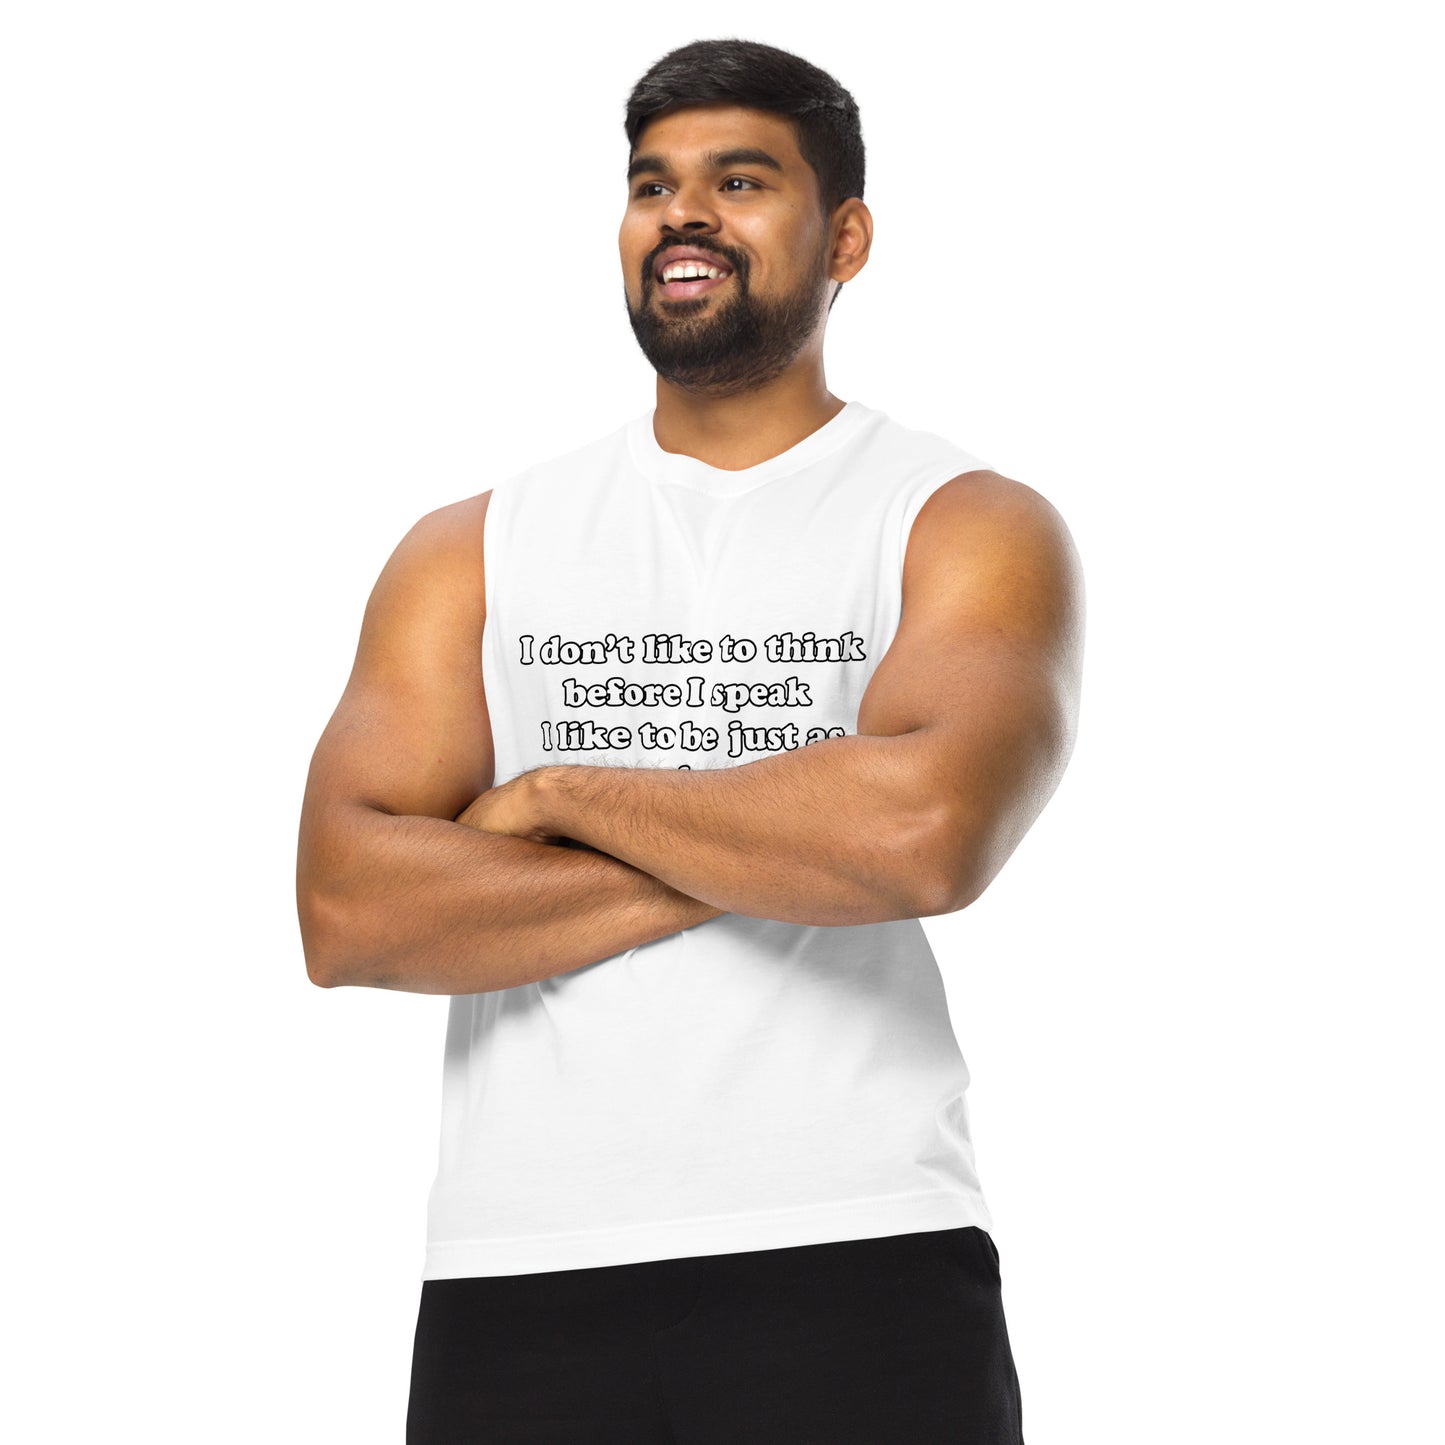 Man with white muscle tank top with text “I don't think before I speak Just as serprised as everyone about what comes out of my mouth"